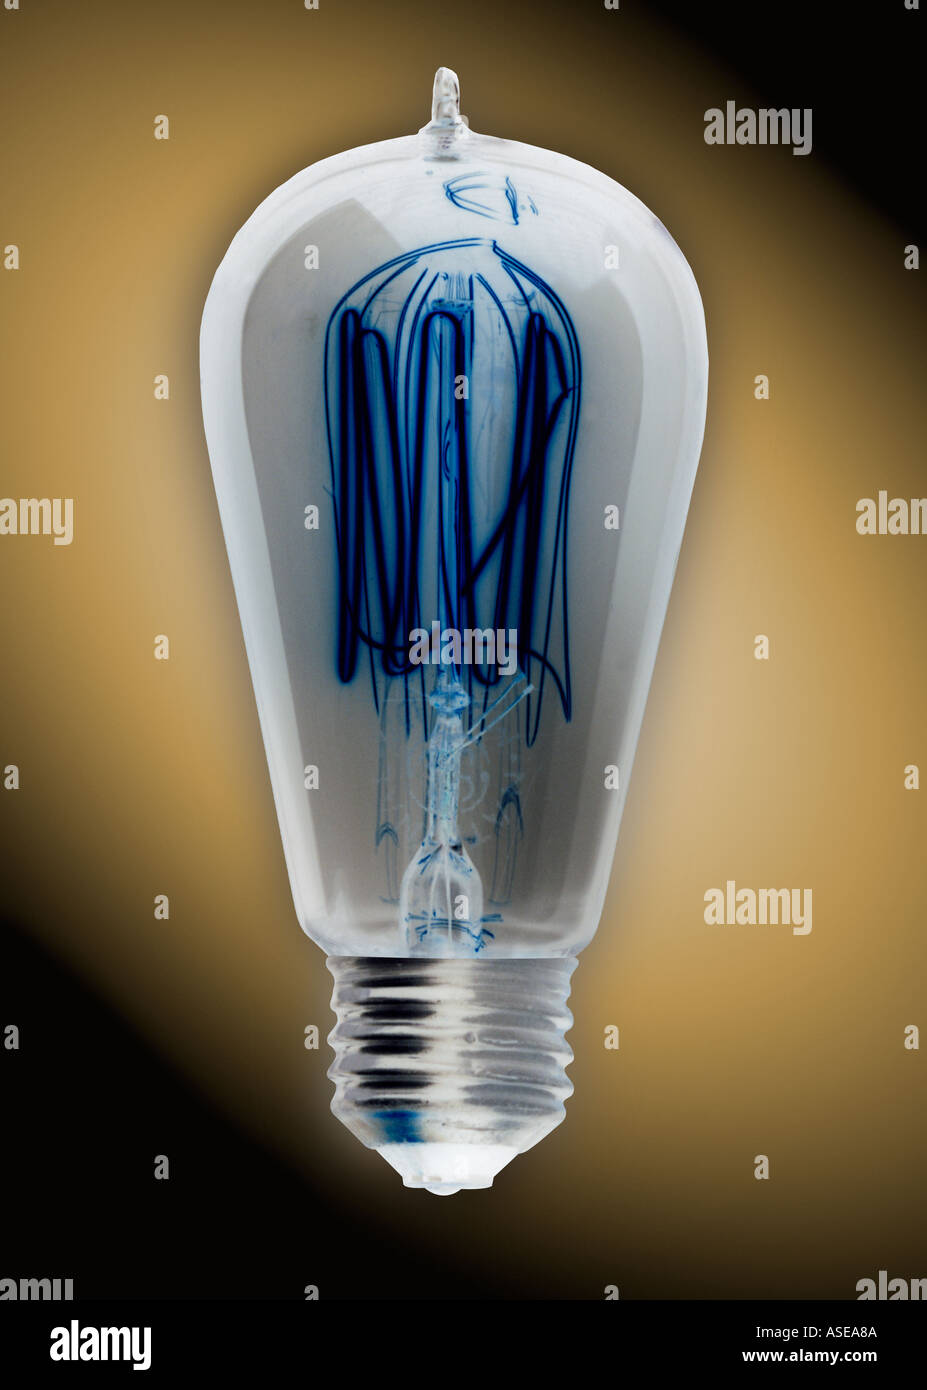 old fashioned Edison style light bulb. The image has been inverted. Stock Photo